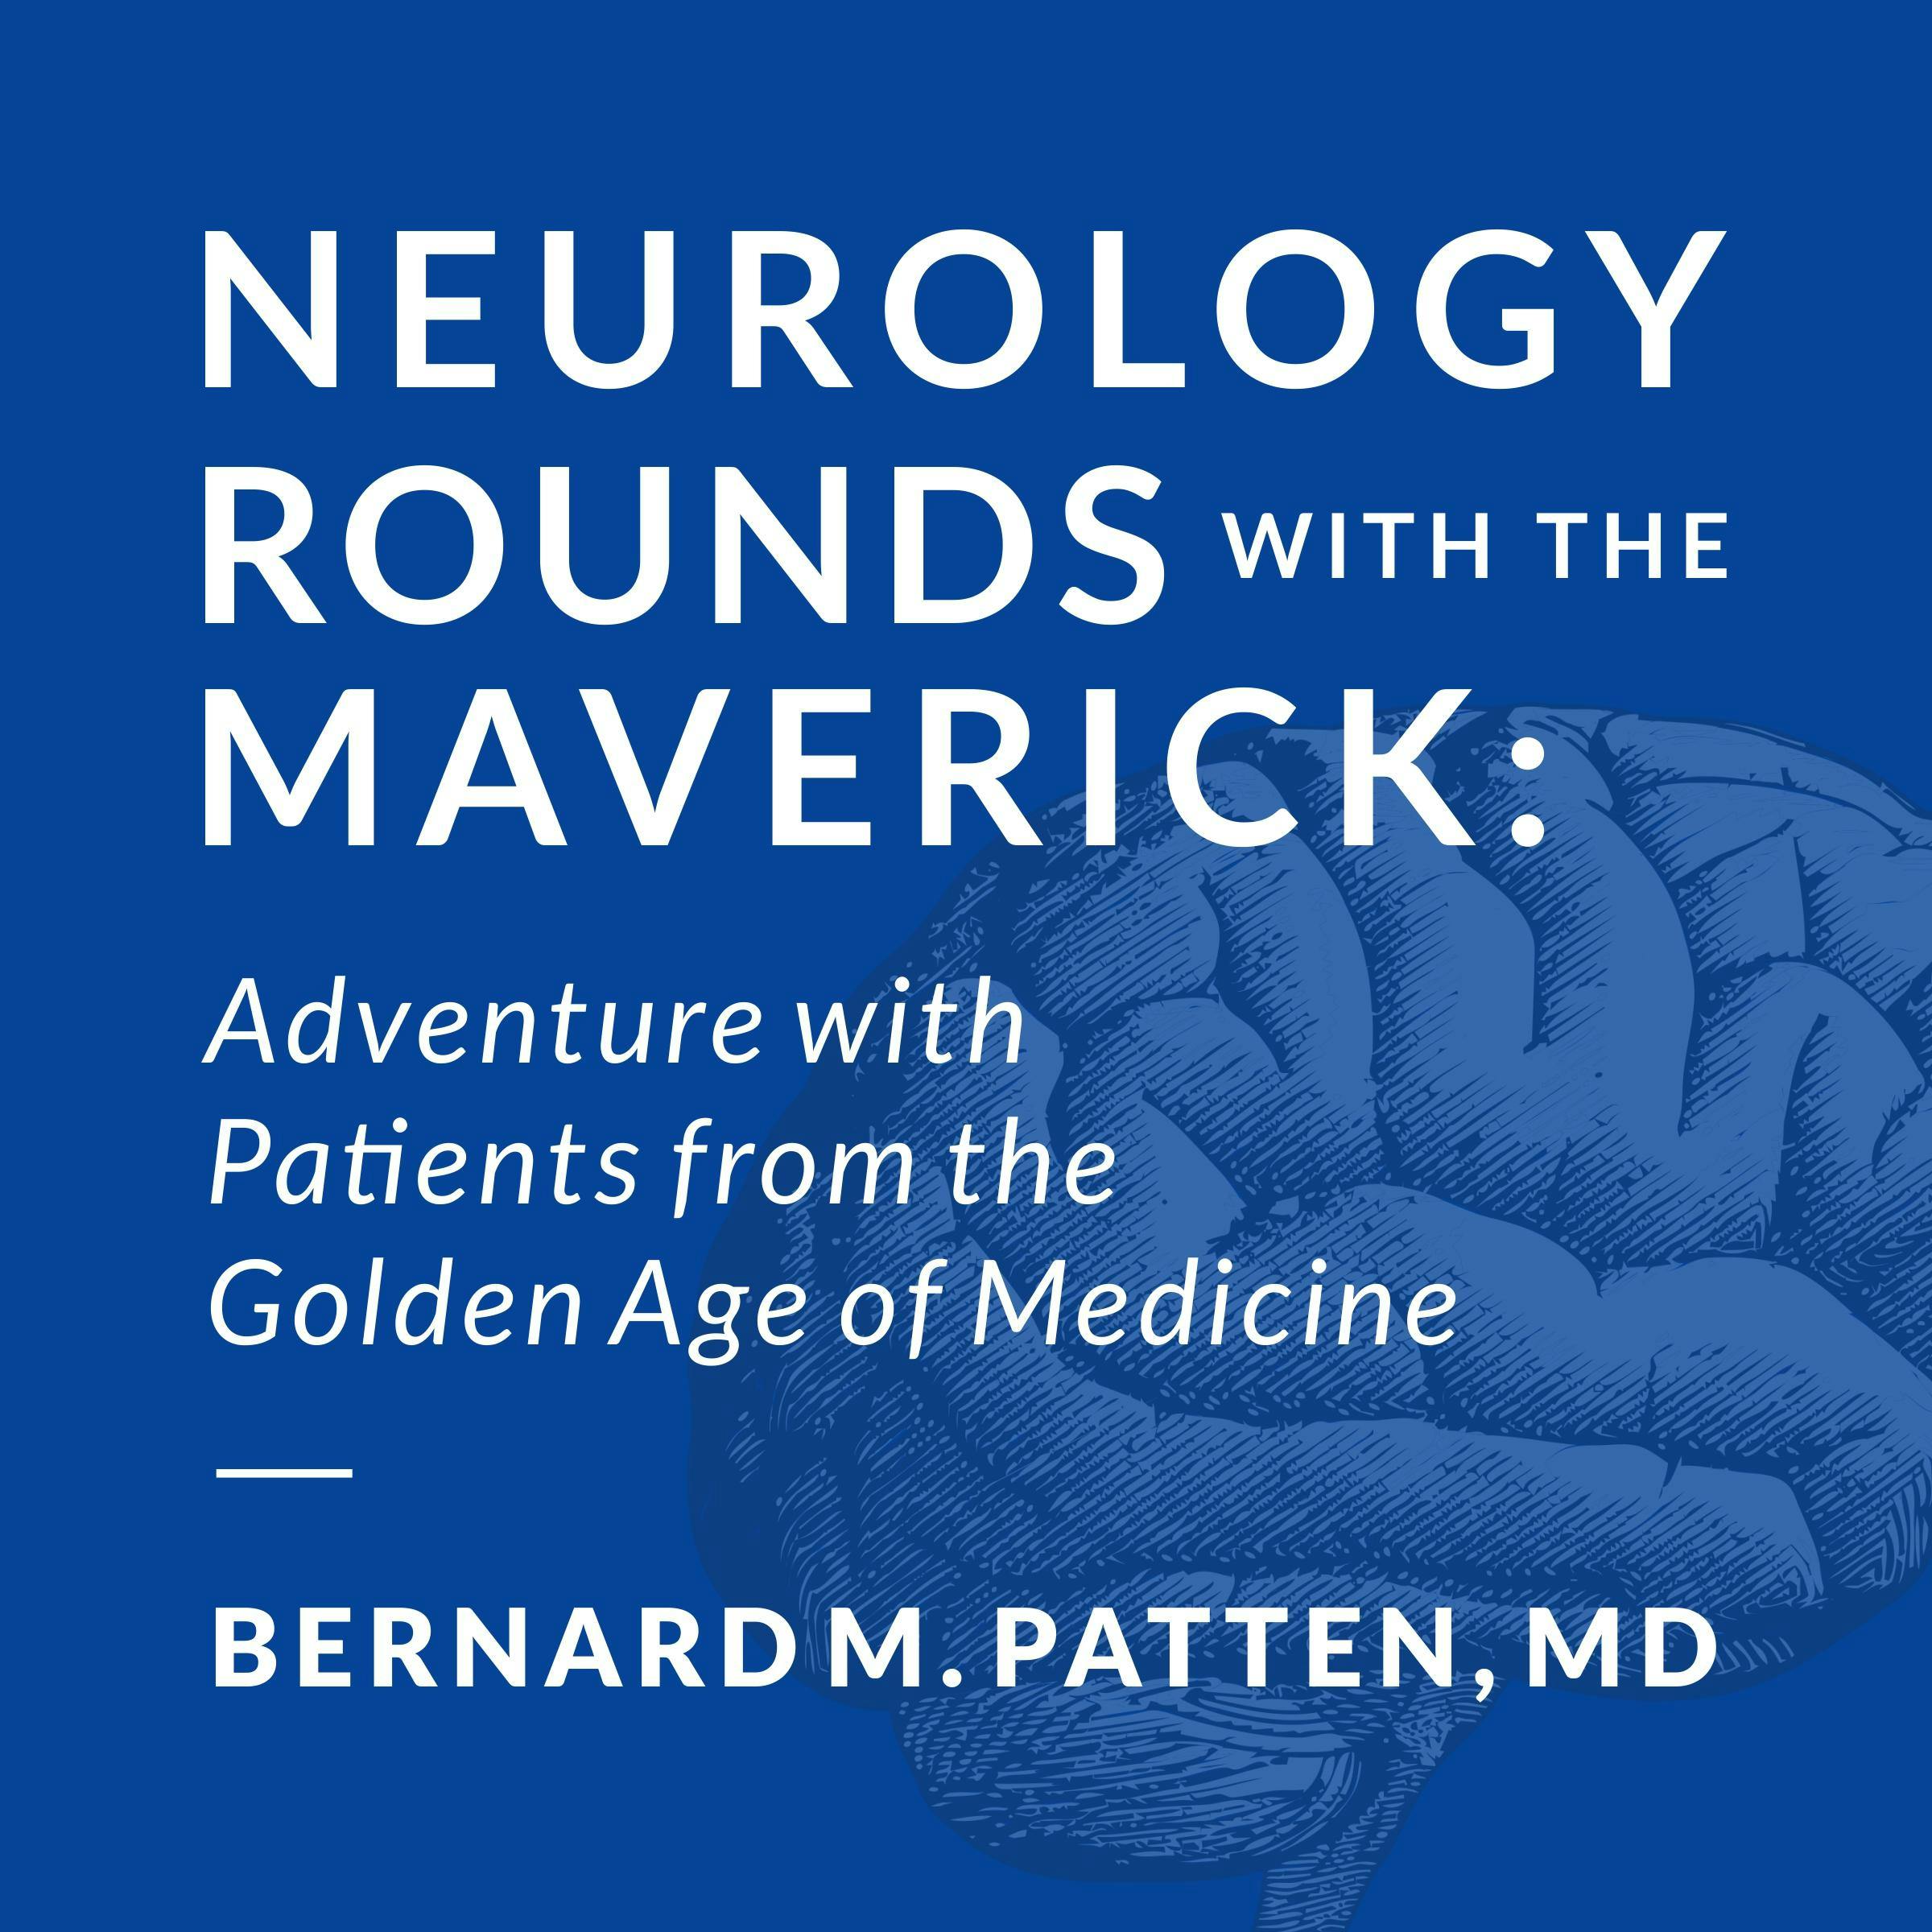 Neurology Rounds with the Maverick: Adventures with Patients from the Golden Age of Medicine - Bernard M. Patten